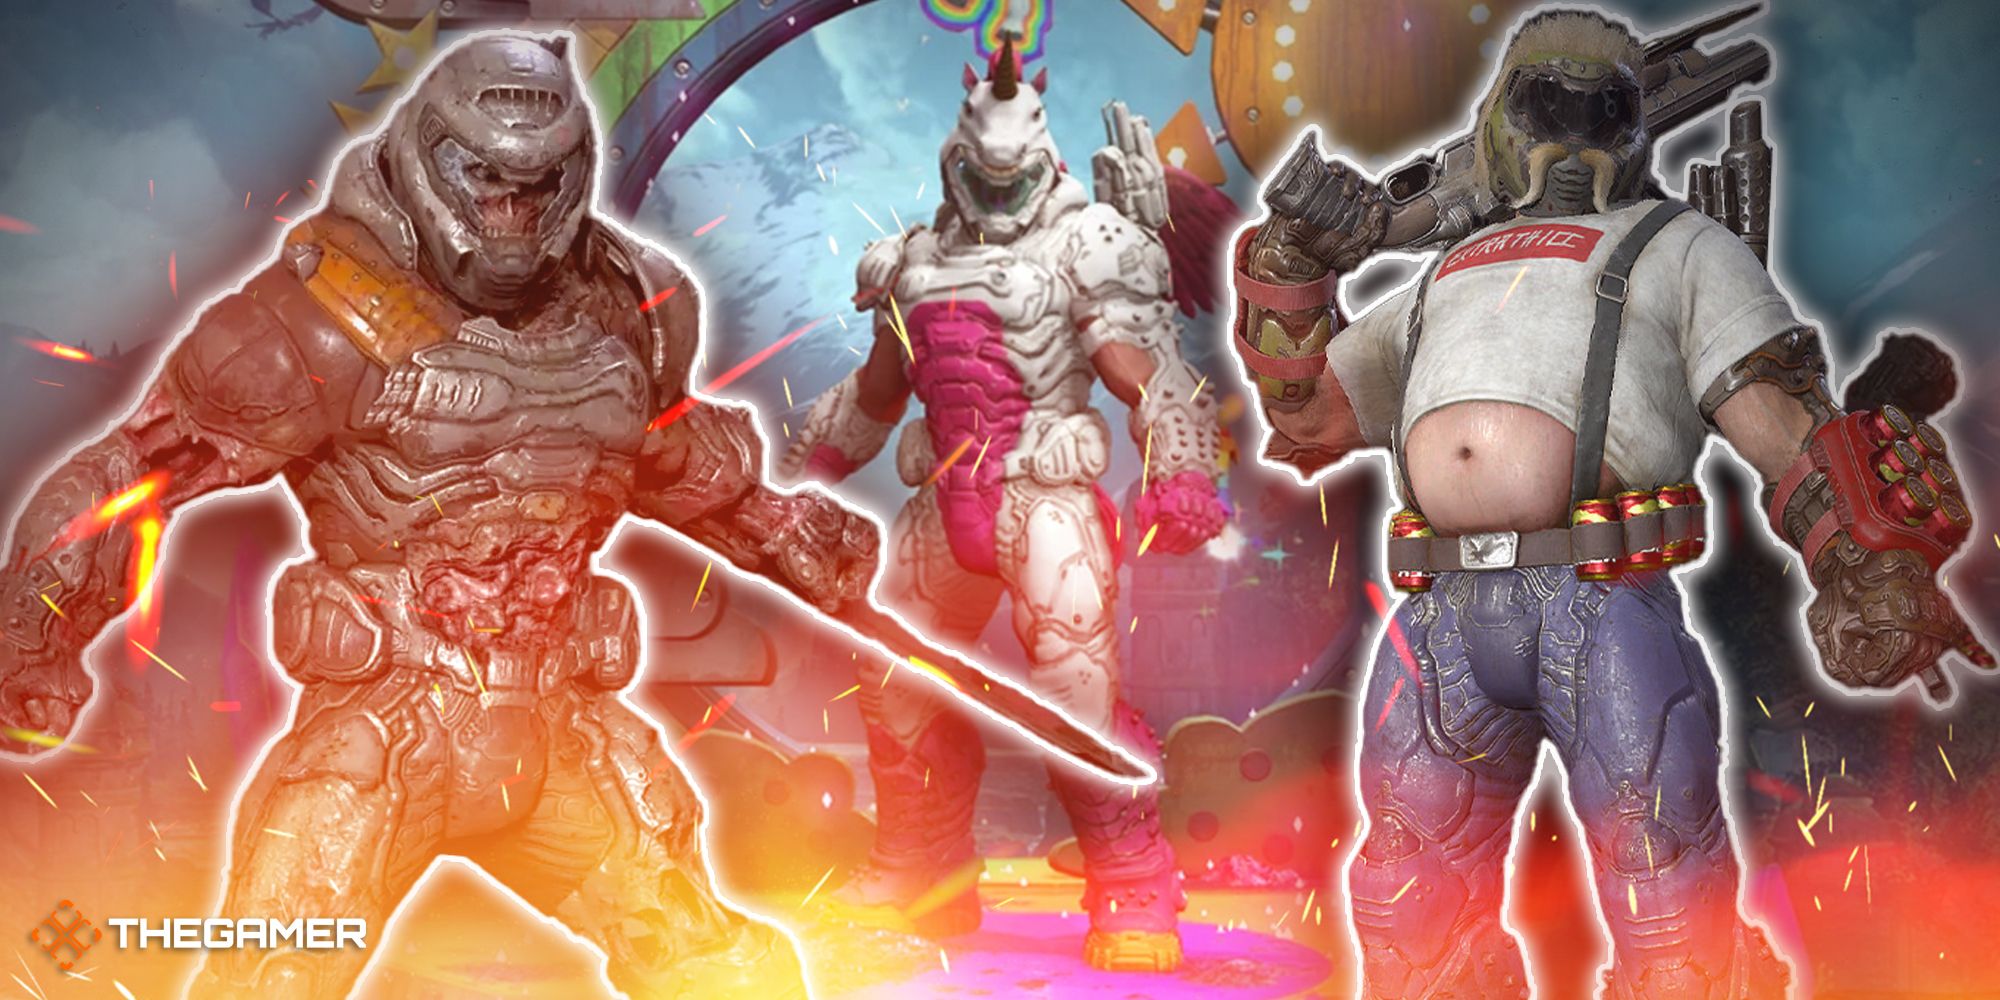 Game images featuring character skins from Doom Eternal.